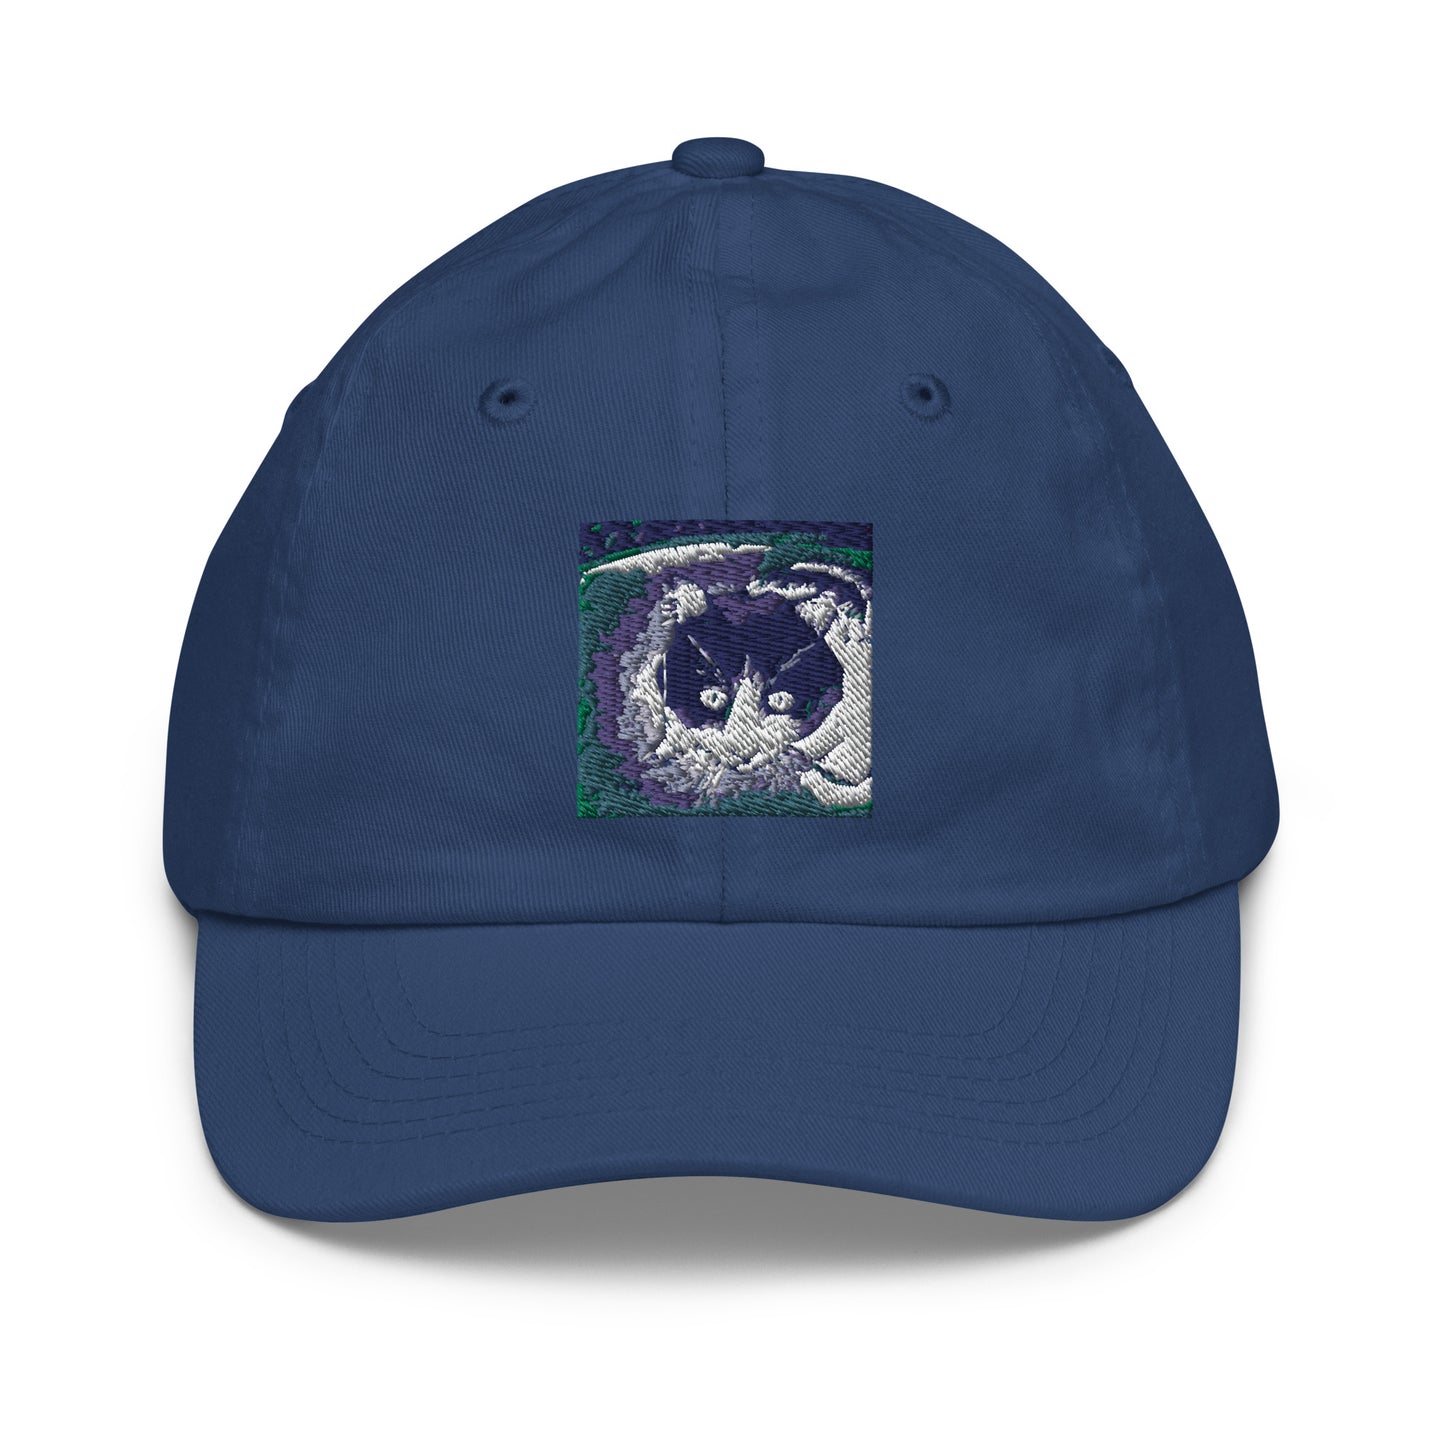 Black and White, Cat in Green Grass Youth baseball cap